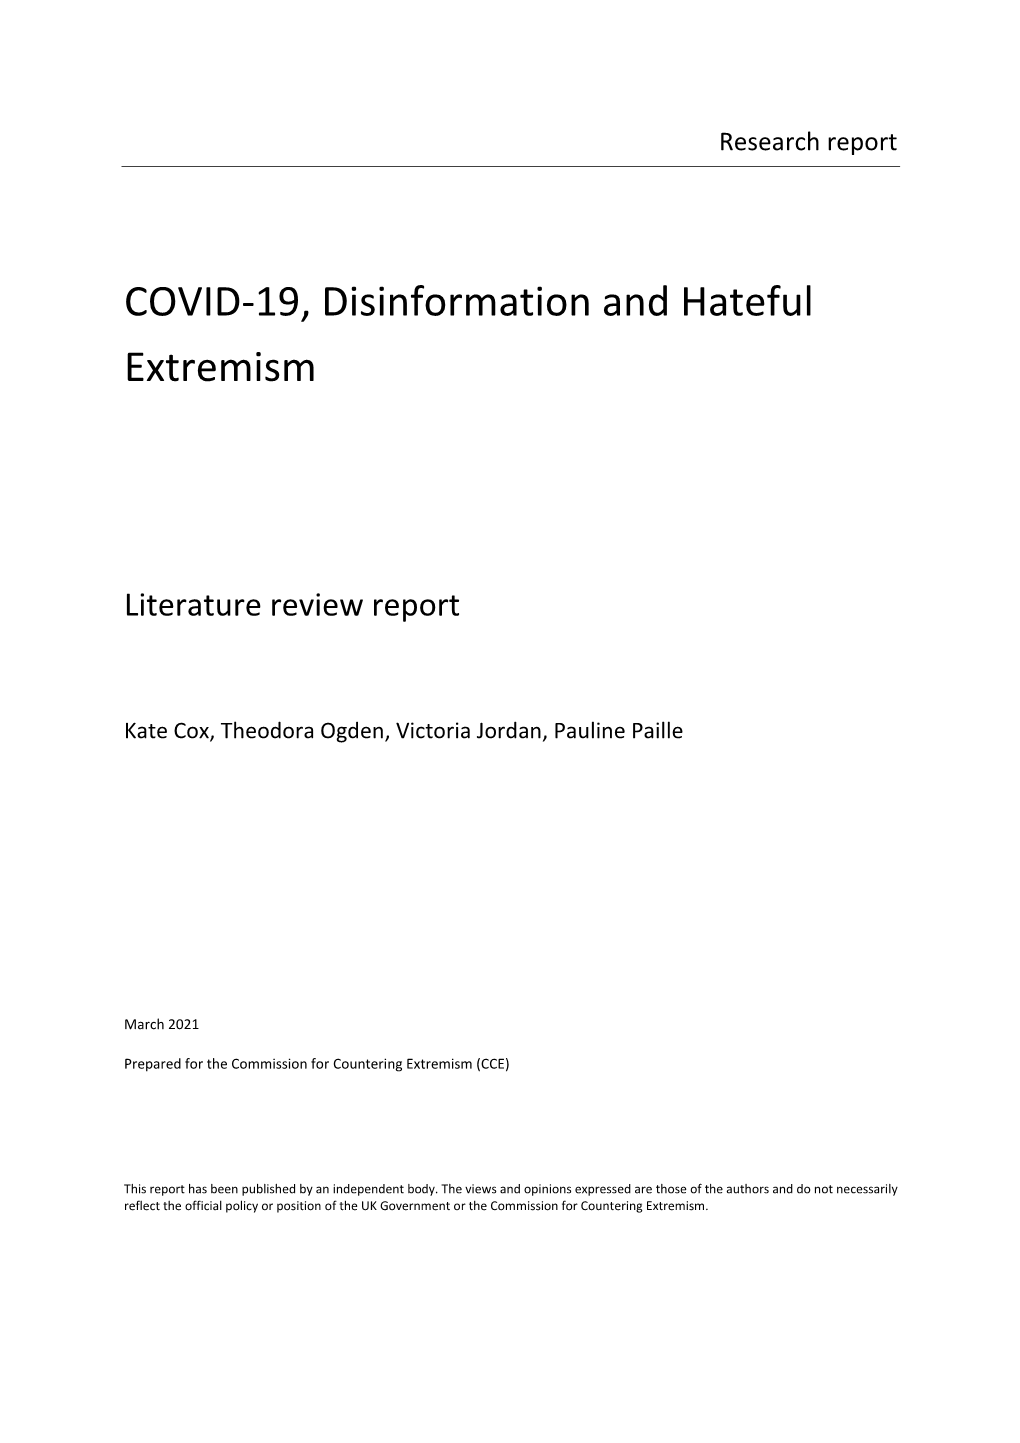 COVID-19, Disinformation and Hateful Extremism